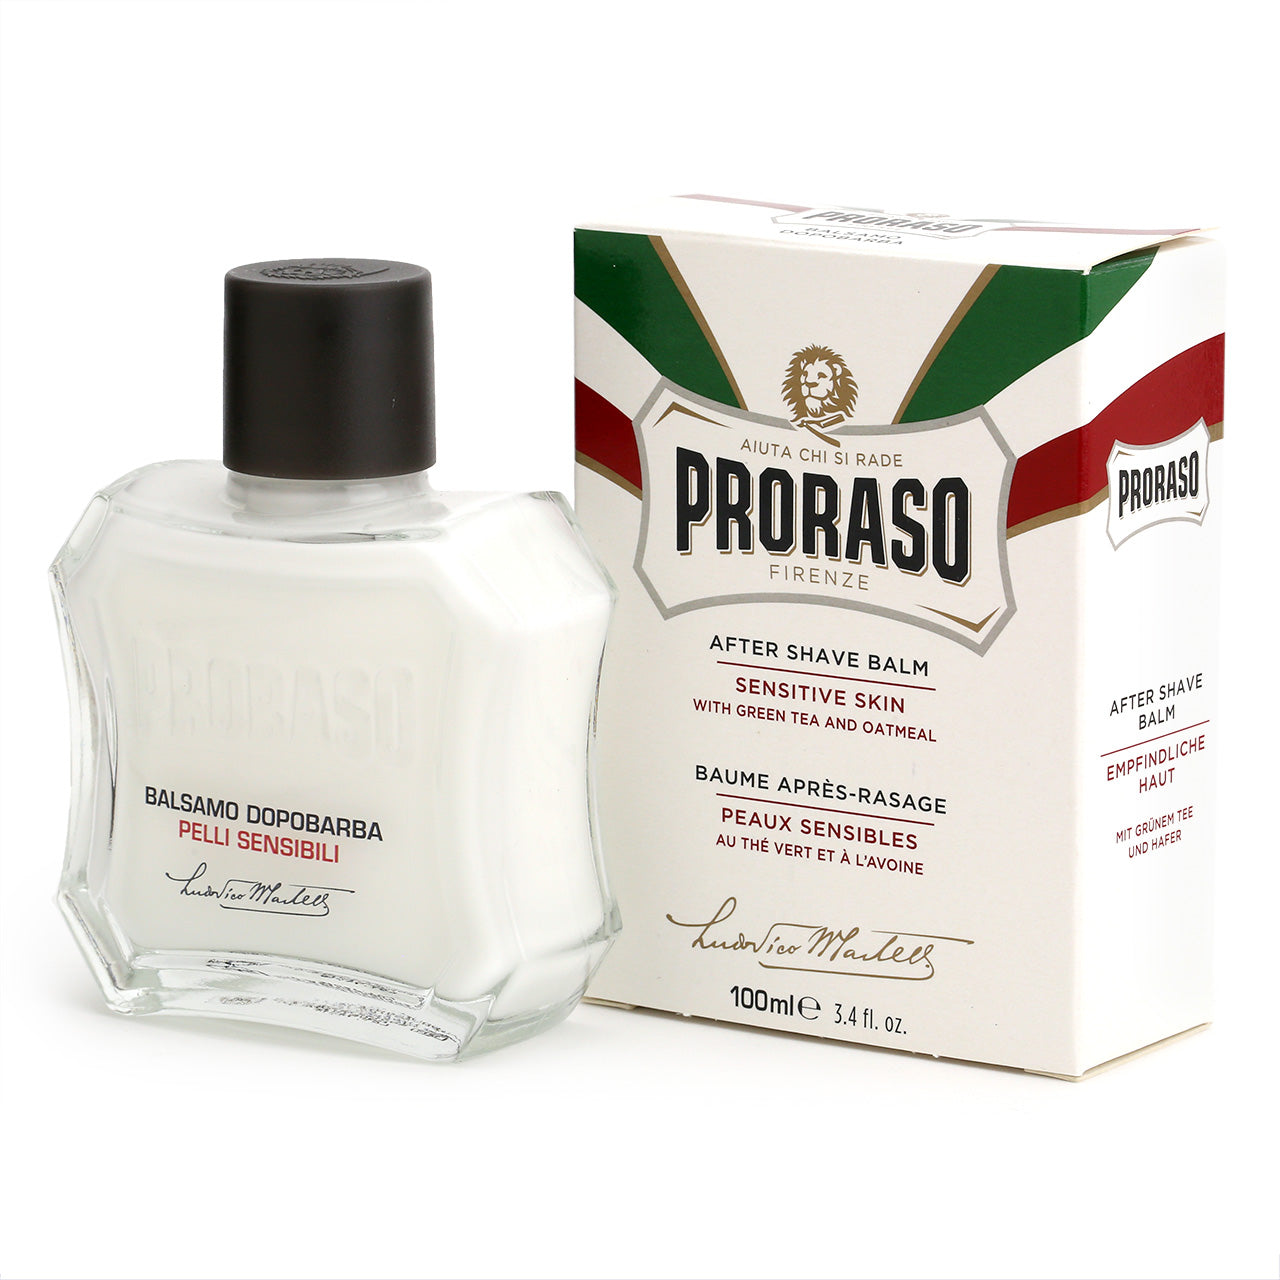 Proraso After Shave Balm with Green Tea & Oatmeal for sensitive skin - retro bottle shape with box